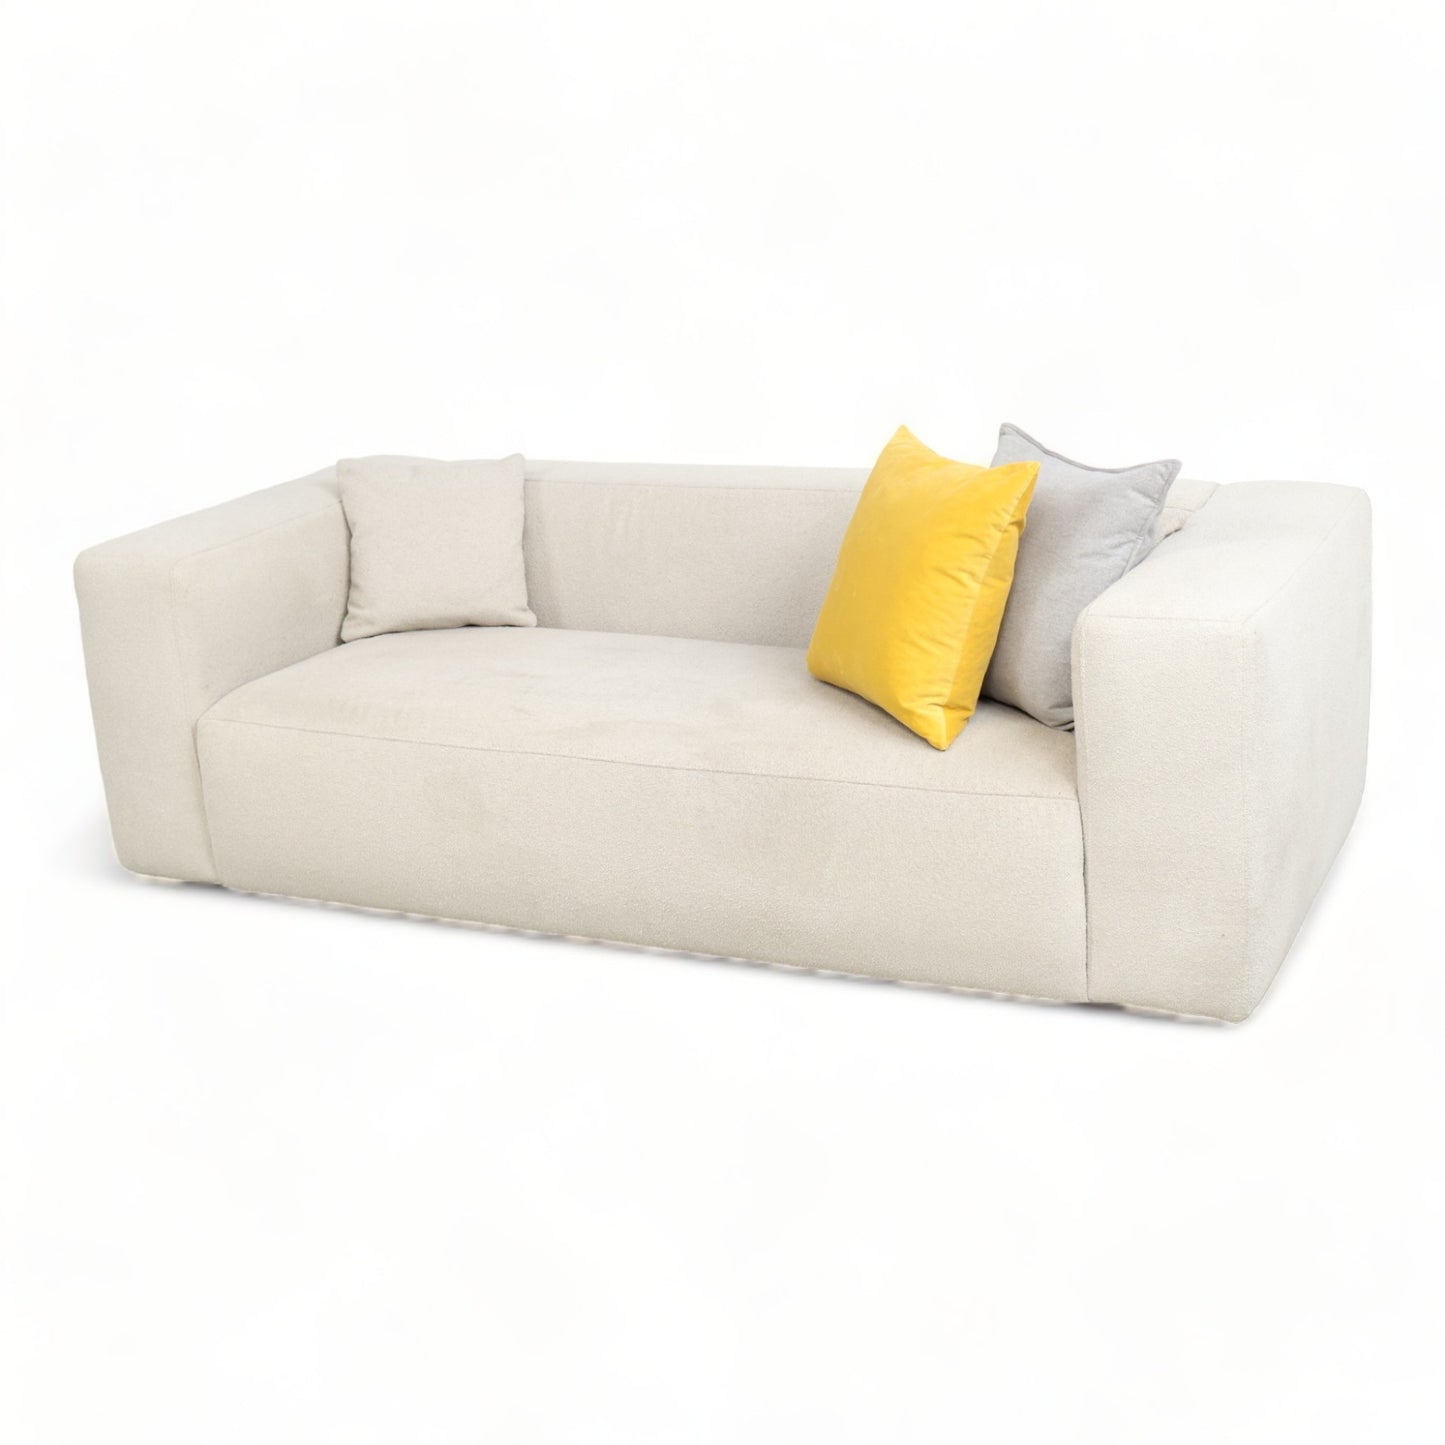 Nyrenset | Beige Home and Cottage Juno 3-seter sofa